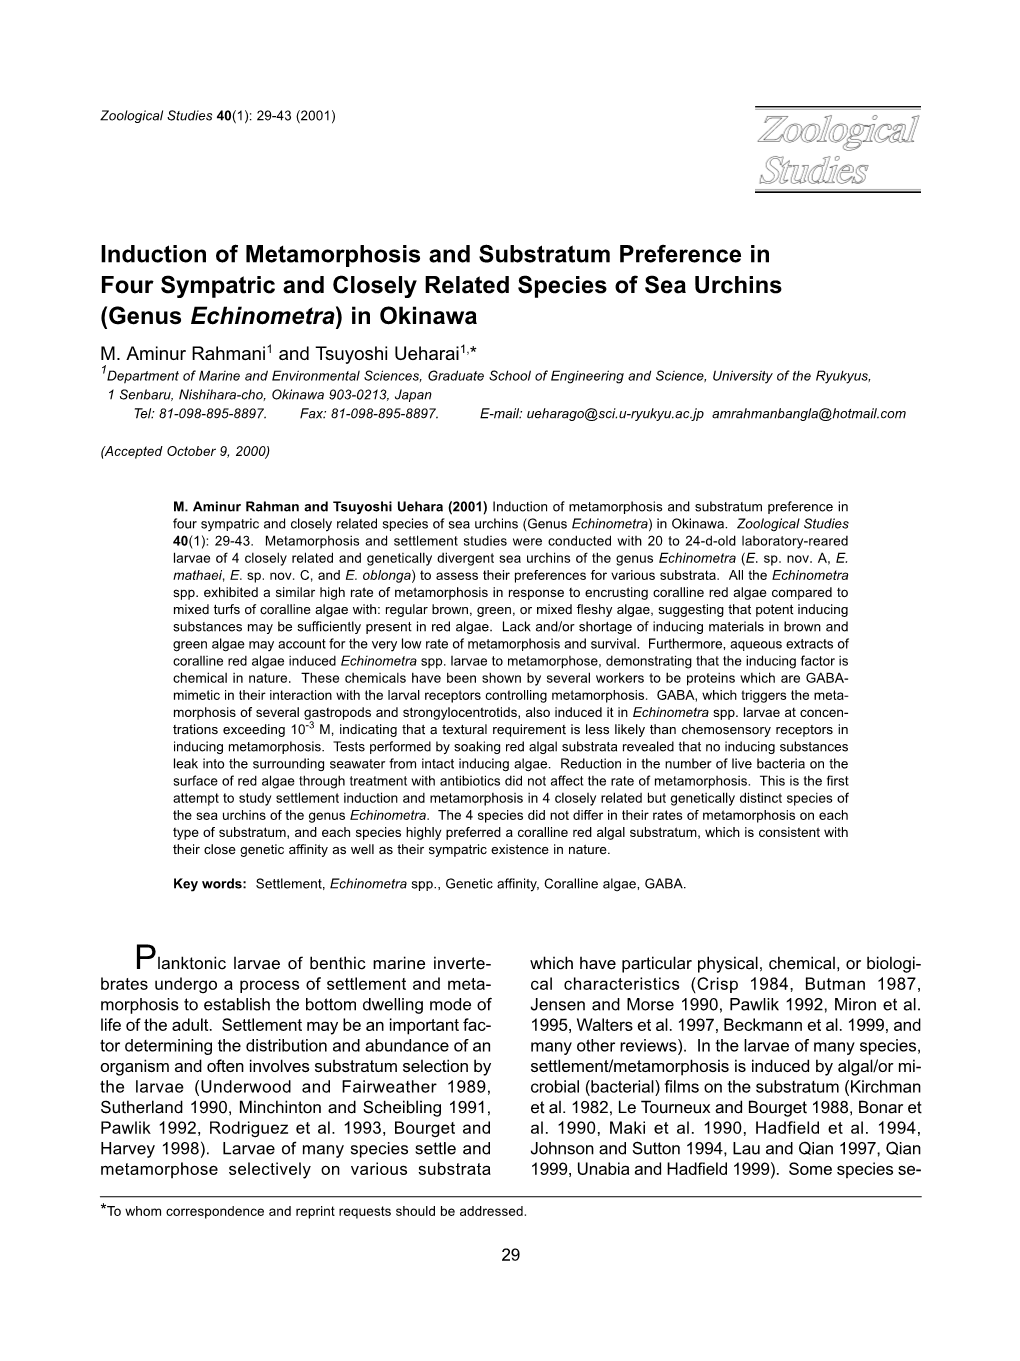 Induction of Metamorphosis and Substratum Preference in Four Sympatric and Closely Related Species of Sea Urchins (Genus Echinometra) in Okinawa M